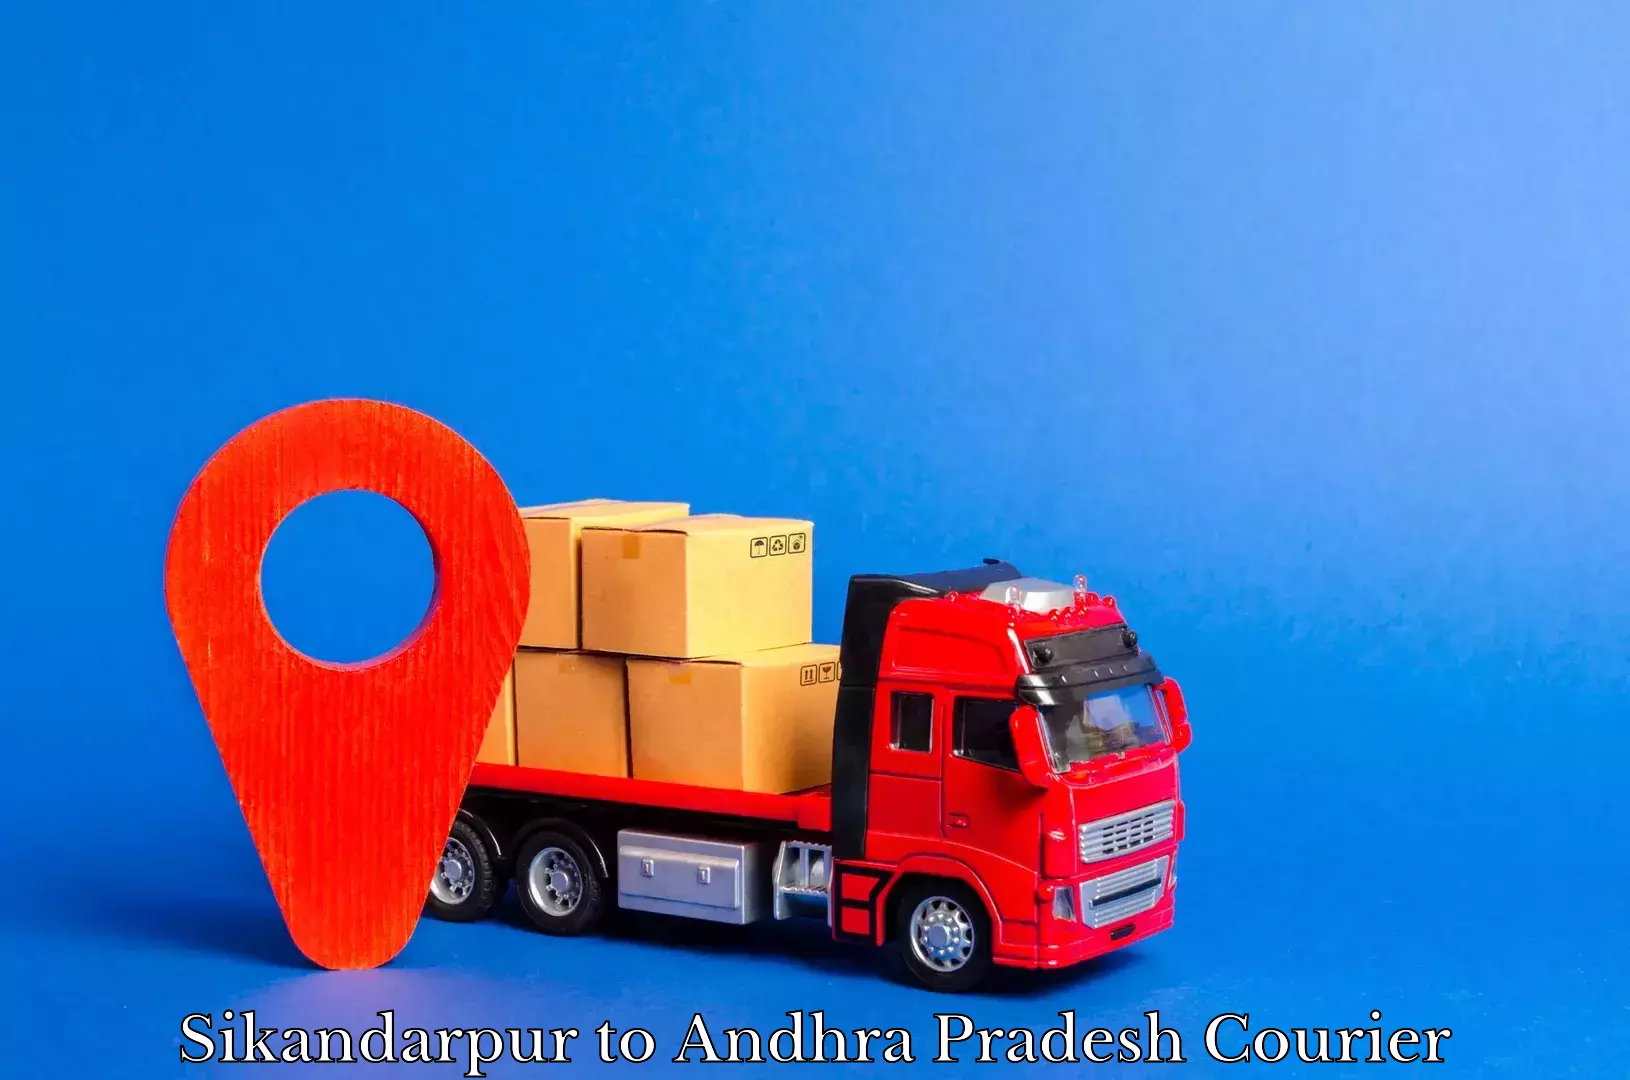 24/7 courier service in Sikandarpur to Andhra Pradesh